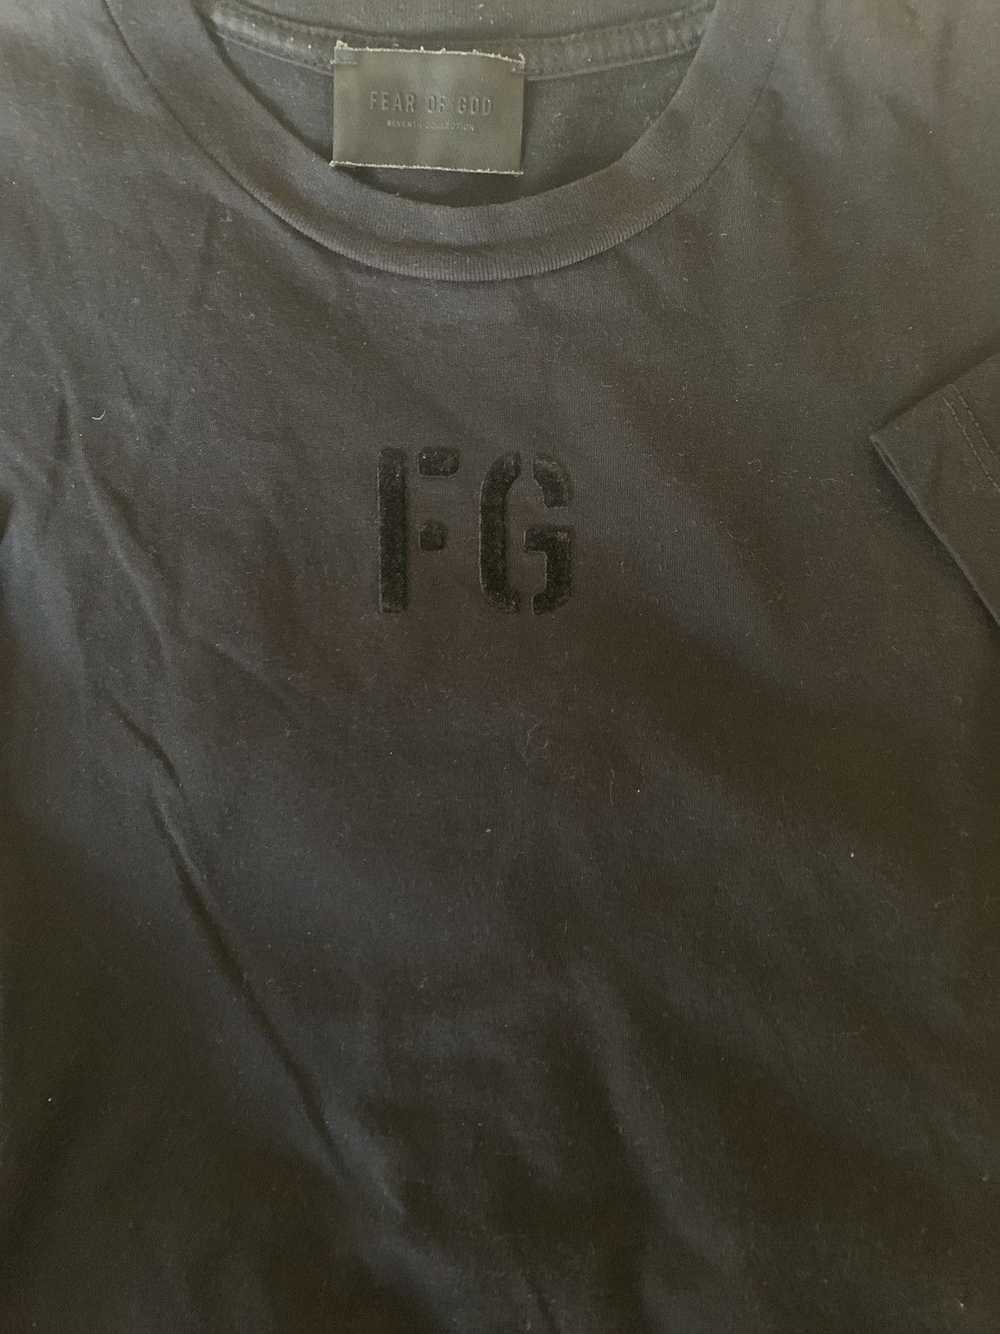 Fear of God Fear of God 7th Collection T Shirt - image 2